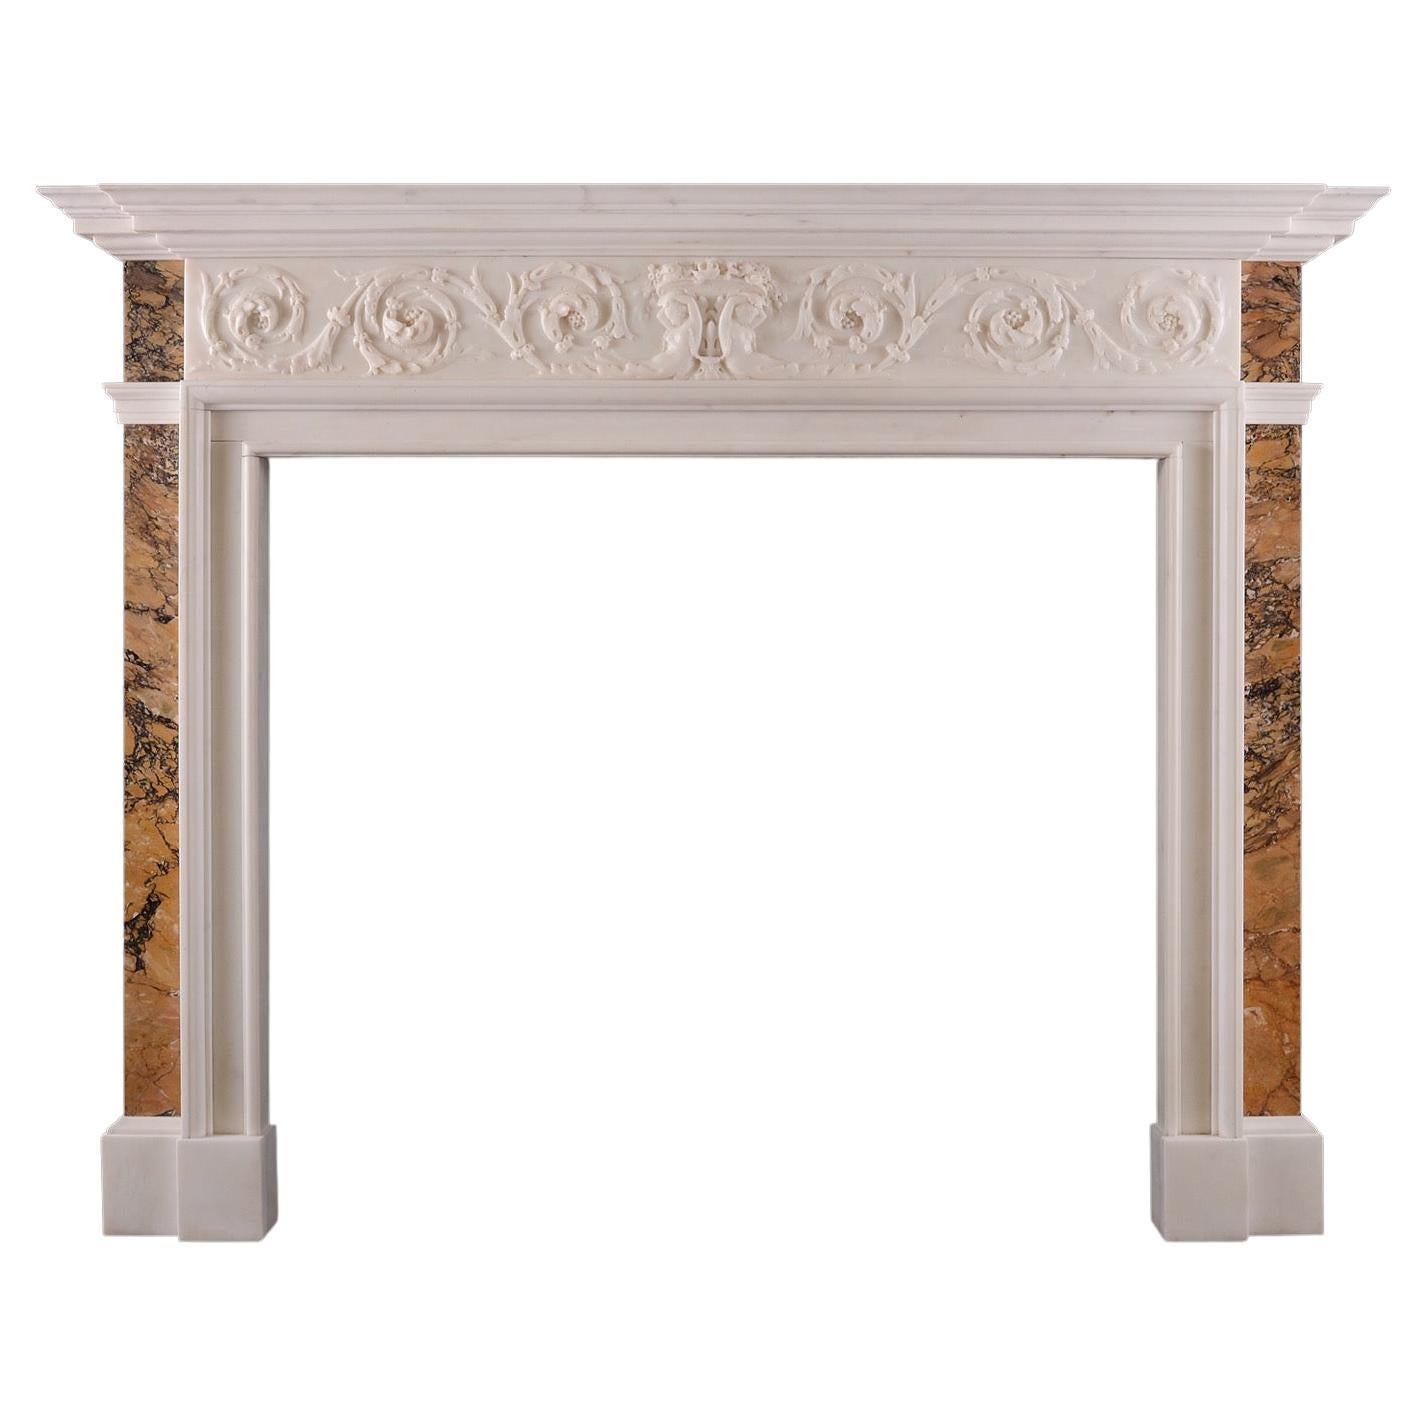 Statuary Marble Fireplace with Italian Sienna Marble Inlay For Sale